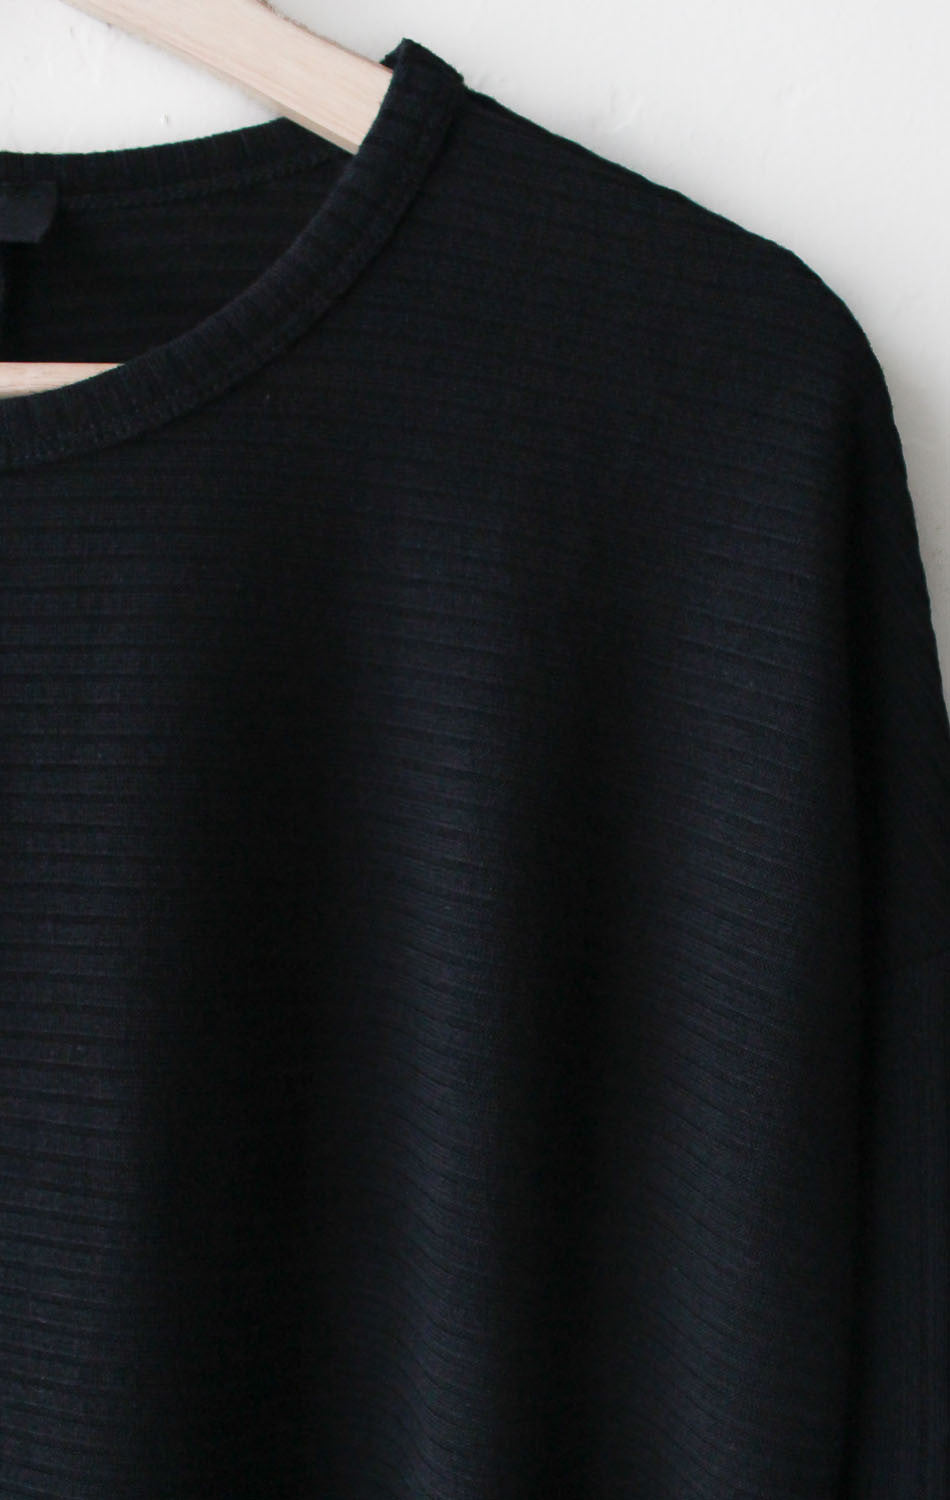 Relaxed Knit Long Sleeve Top - NYCT Clothing